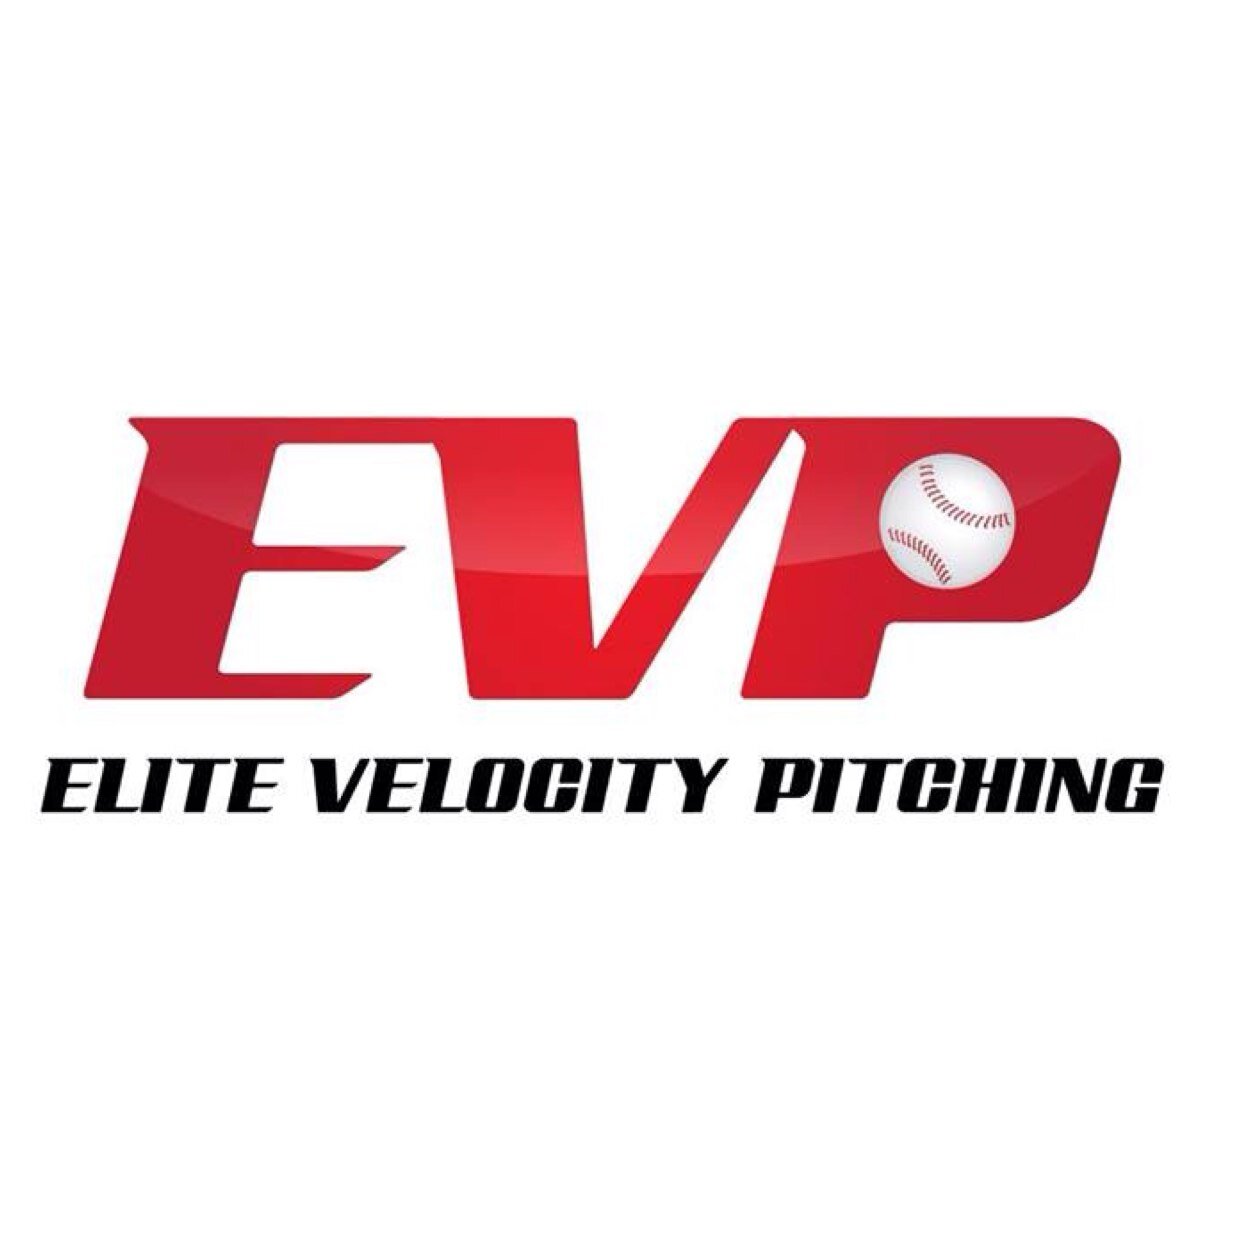 We will pick up just about any object and throw it just about as hard as we can!!! #EVOLVE http://t.co/CW343PY1pu